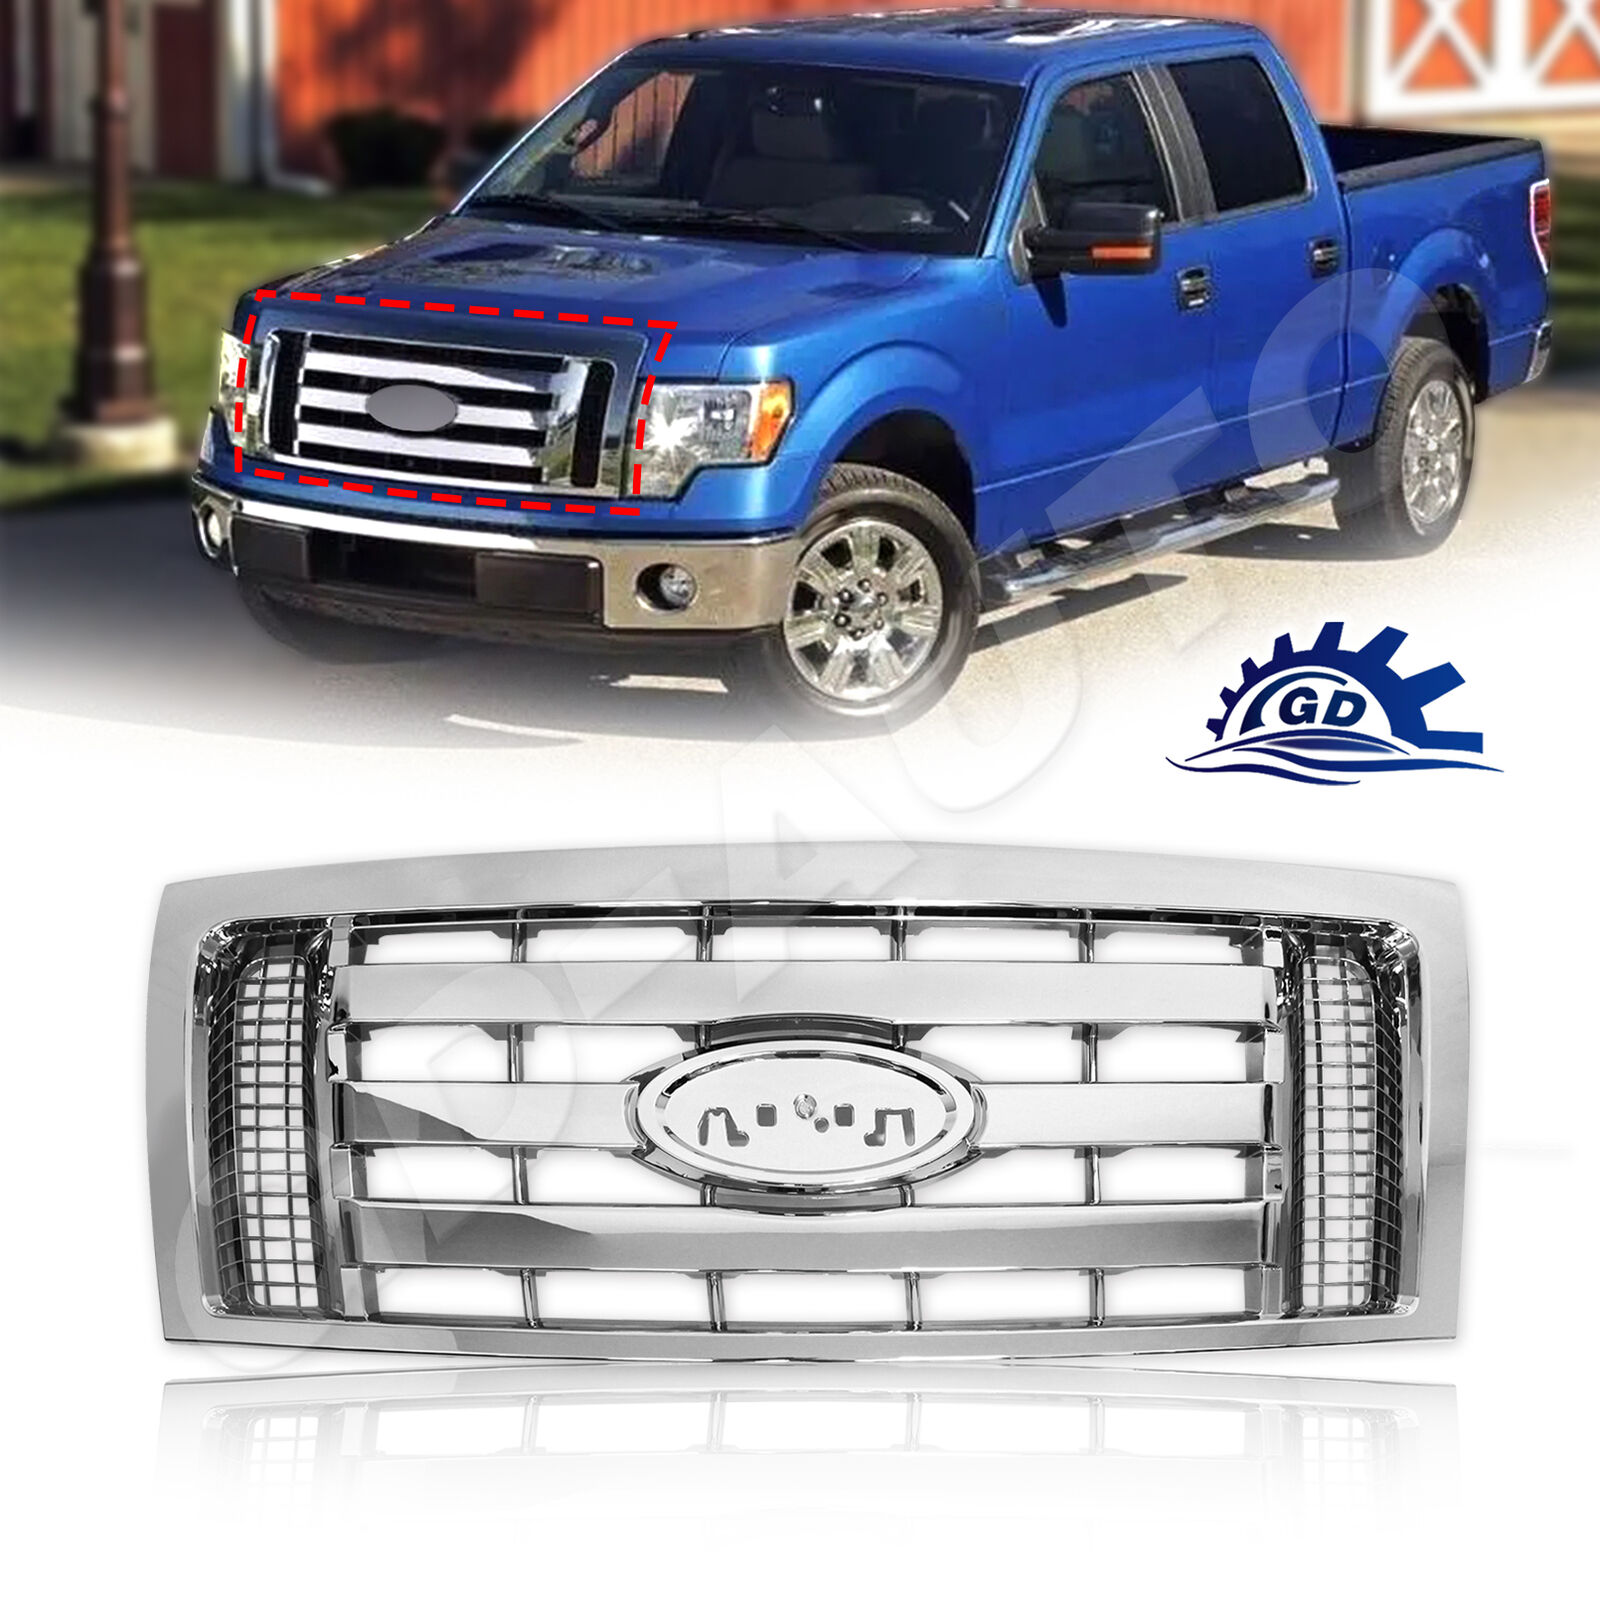 Chrome Upper Front Grille Grill For 2009-2012 2013 2014 Ford F-150 F150 XLT